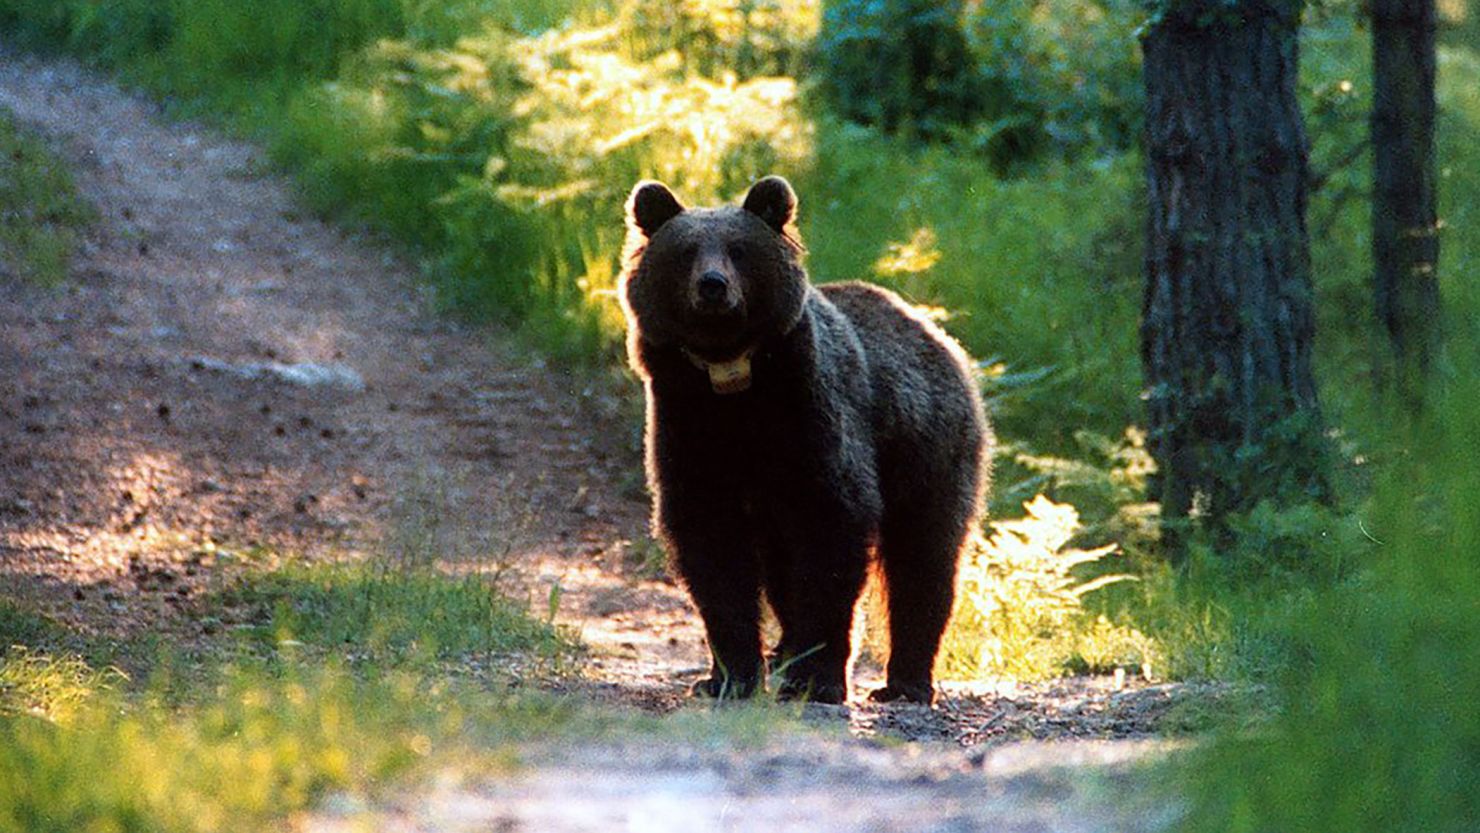 The bear known by Italy's National Institute of Wild Fauna as JJ4 was identified as the one that killed 26-year-old jogger Andrea Papi on a jogging trail in Trento in early April.  